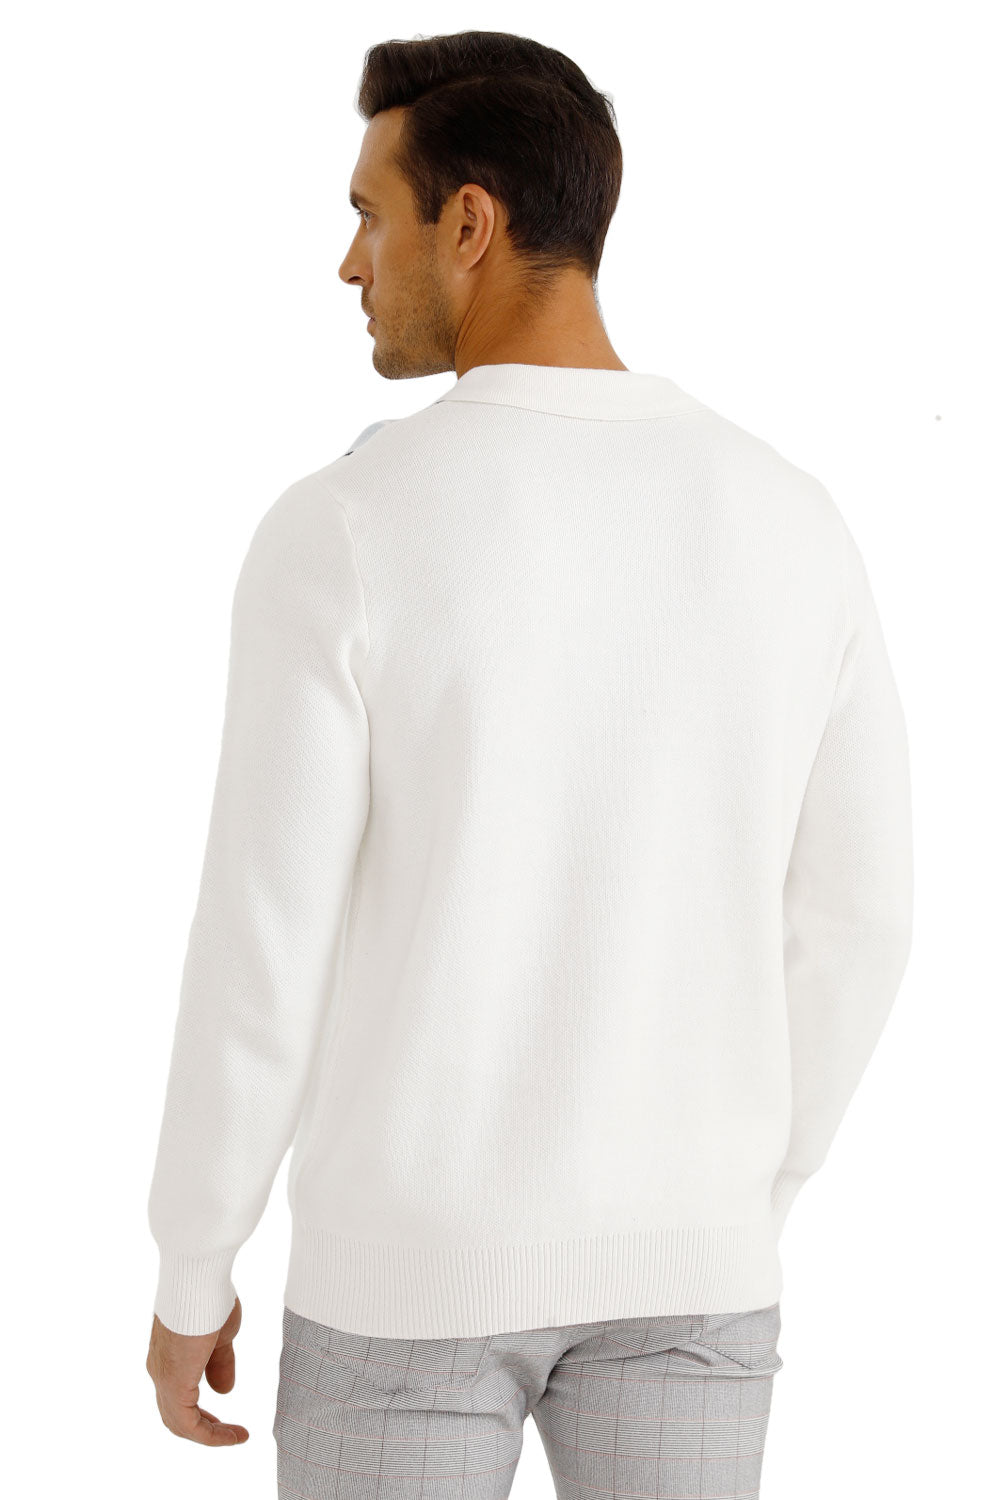 men's button knitted sweater white